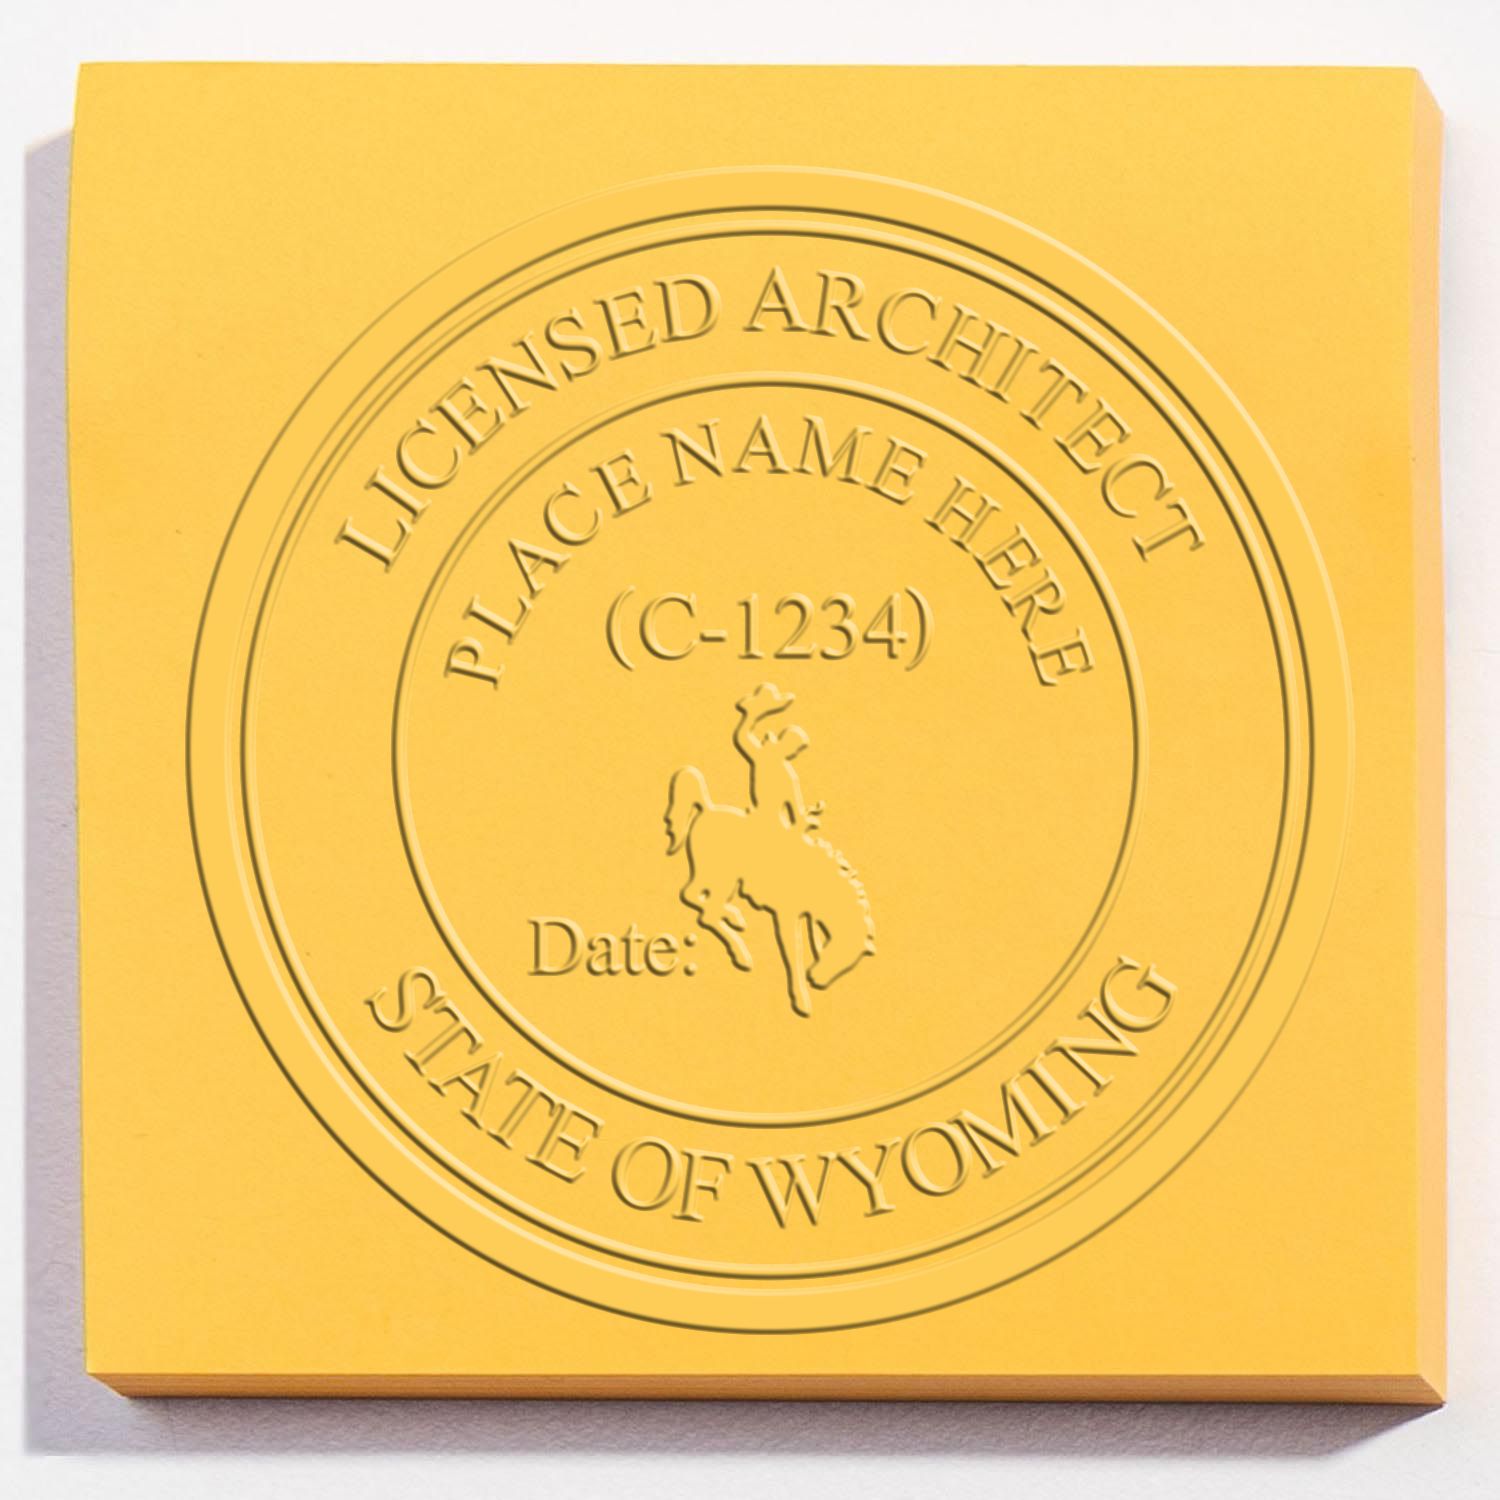 The main image for the Wyoming Desk Architect Embossing Seal depicting a sample of the imprint and electronic files